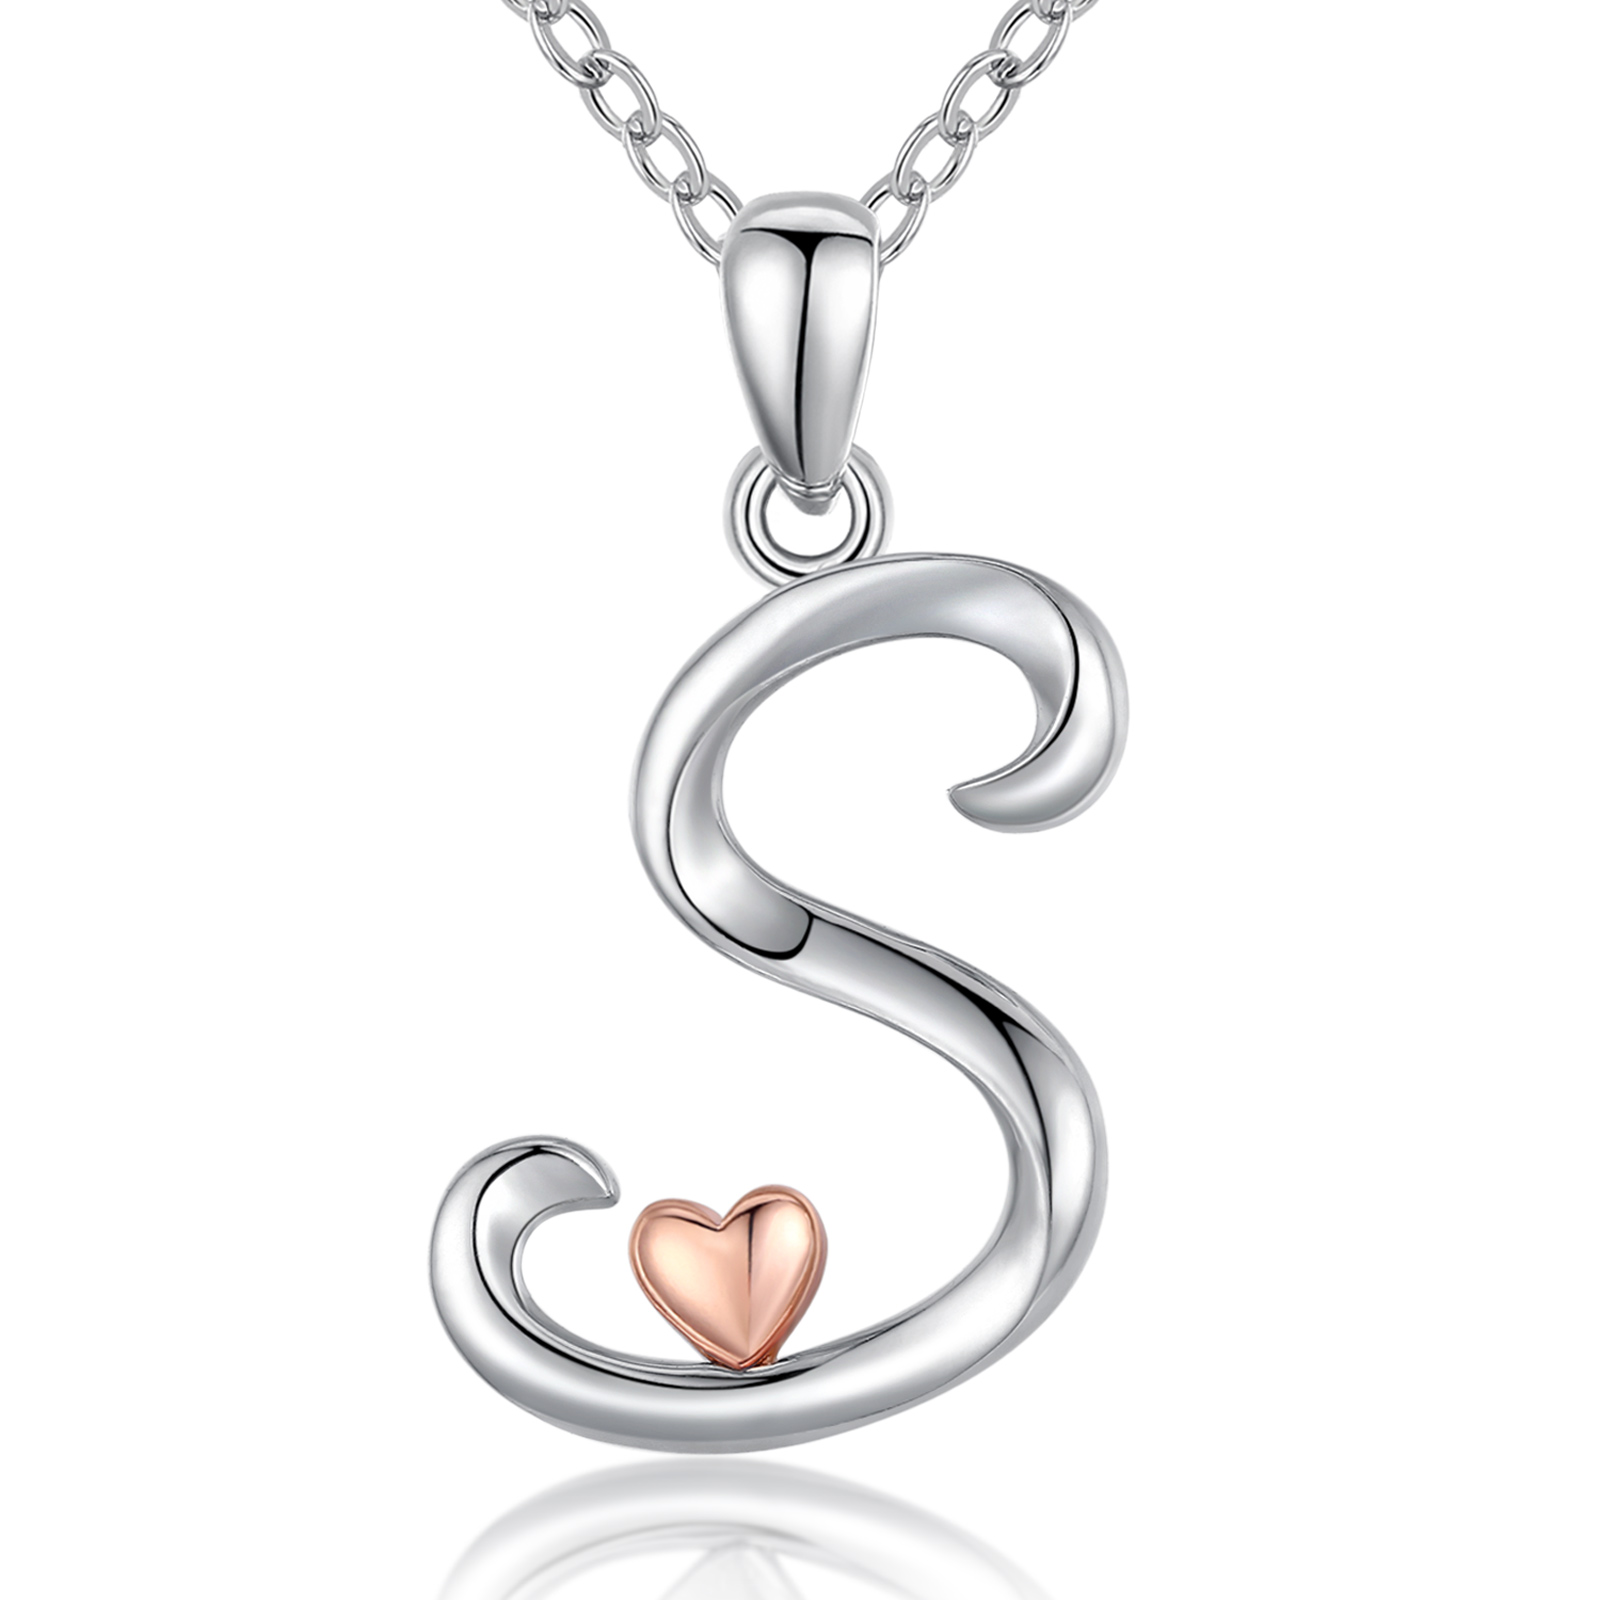 Merryshine Jewelry s925 sterling silver plated rhodium letter S initial pendant necklace